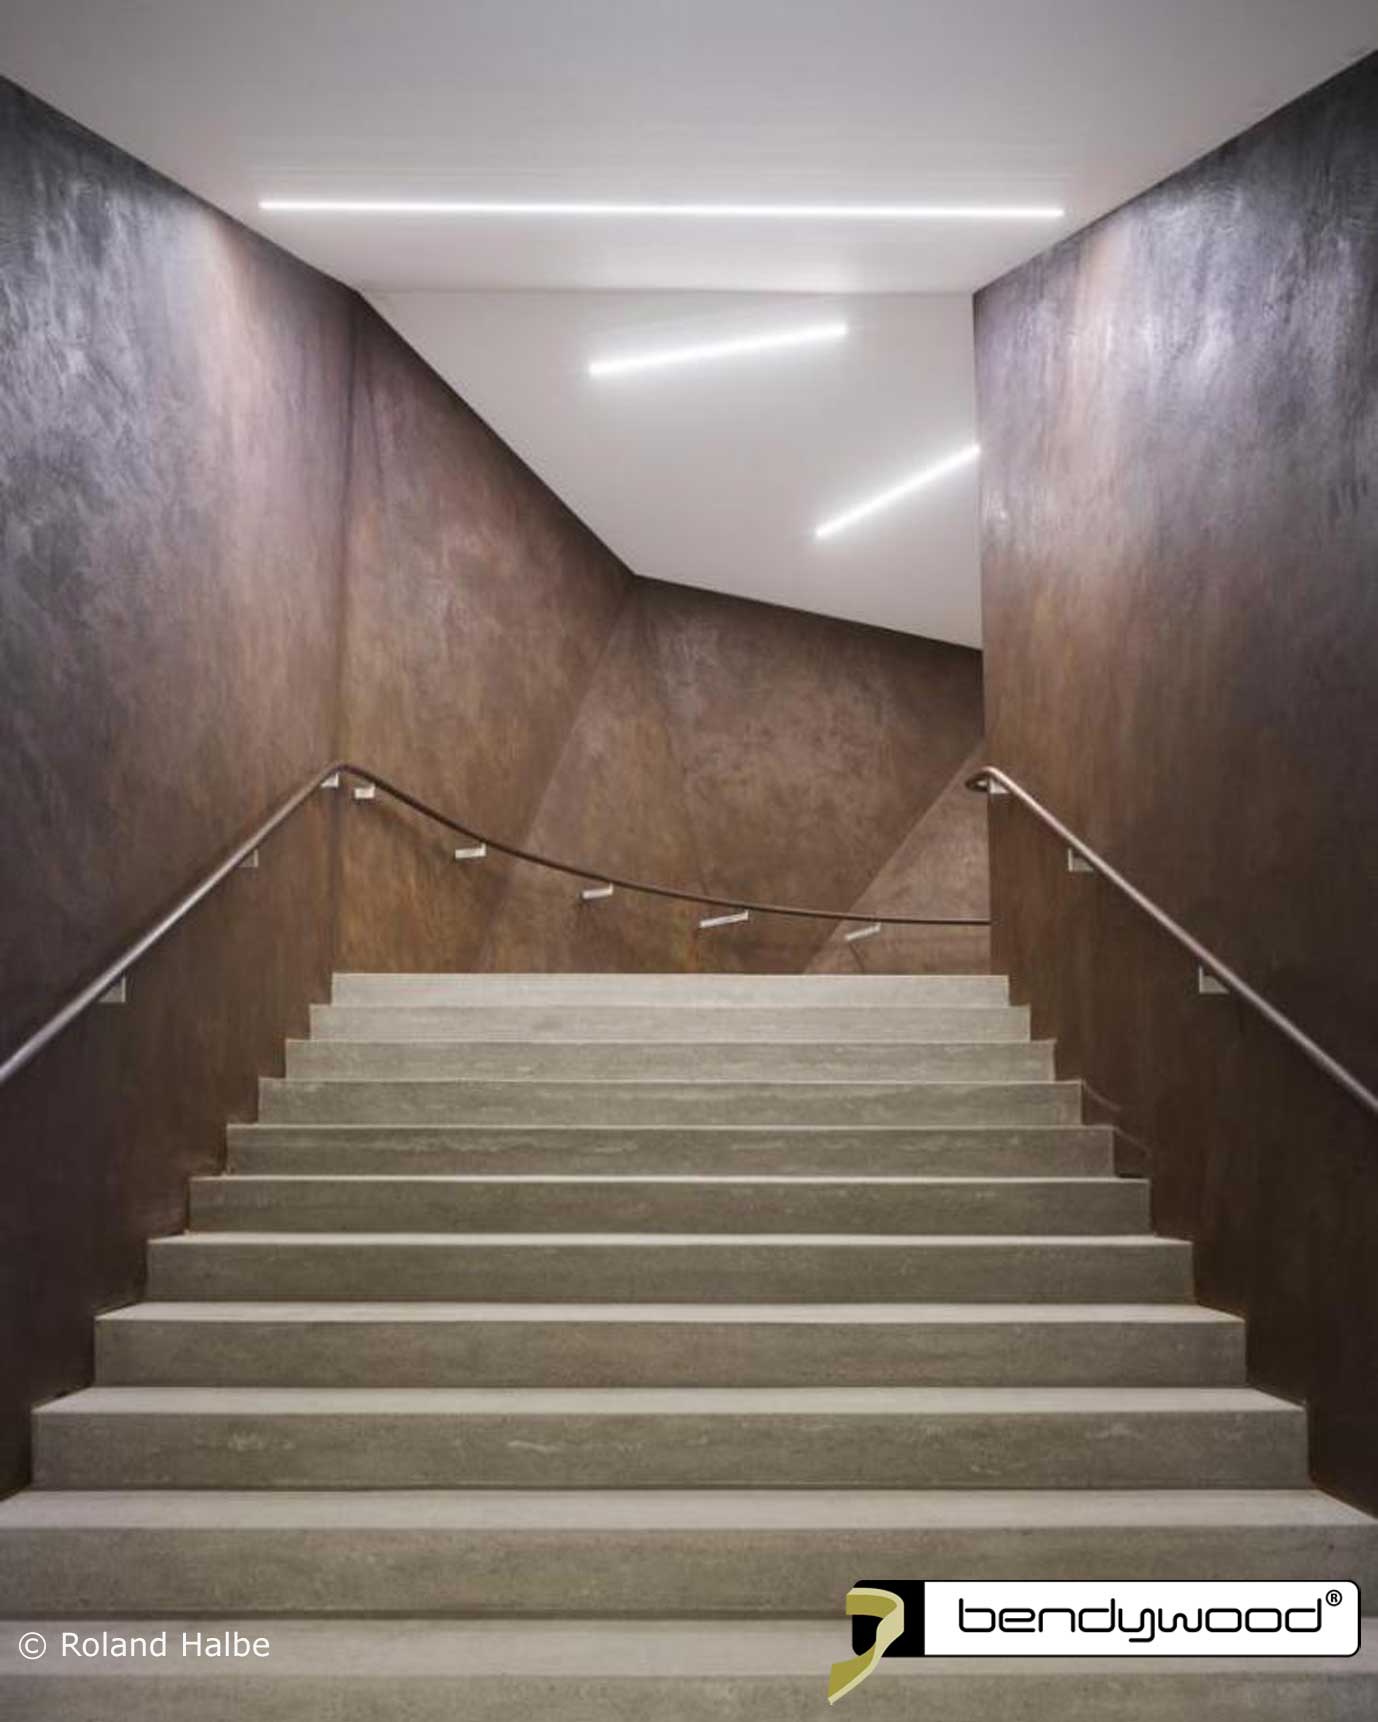 Stairs new concert hall Andermatt, Switzerland. Curved inner and outer handrails in Bendywood® oak.